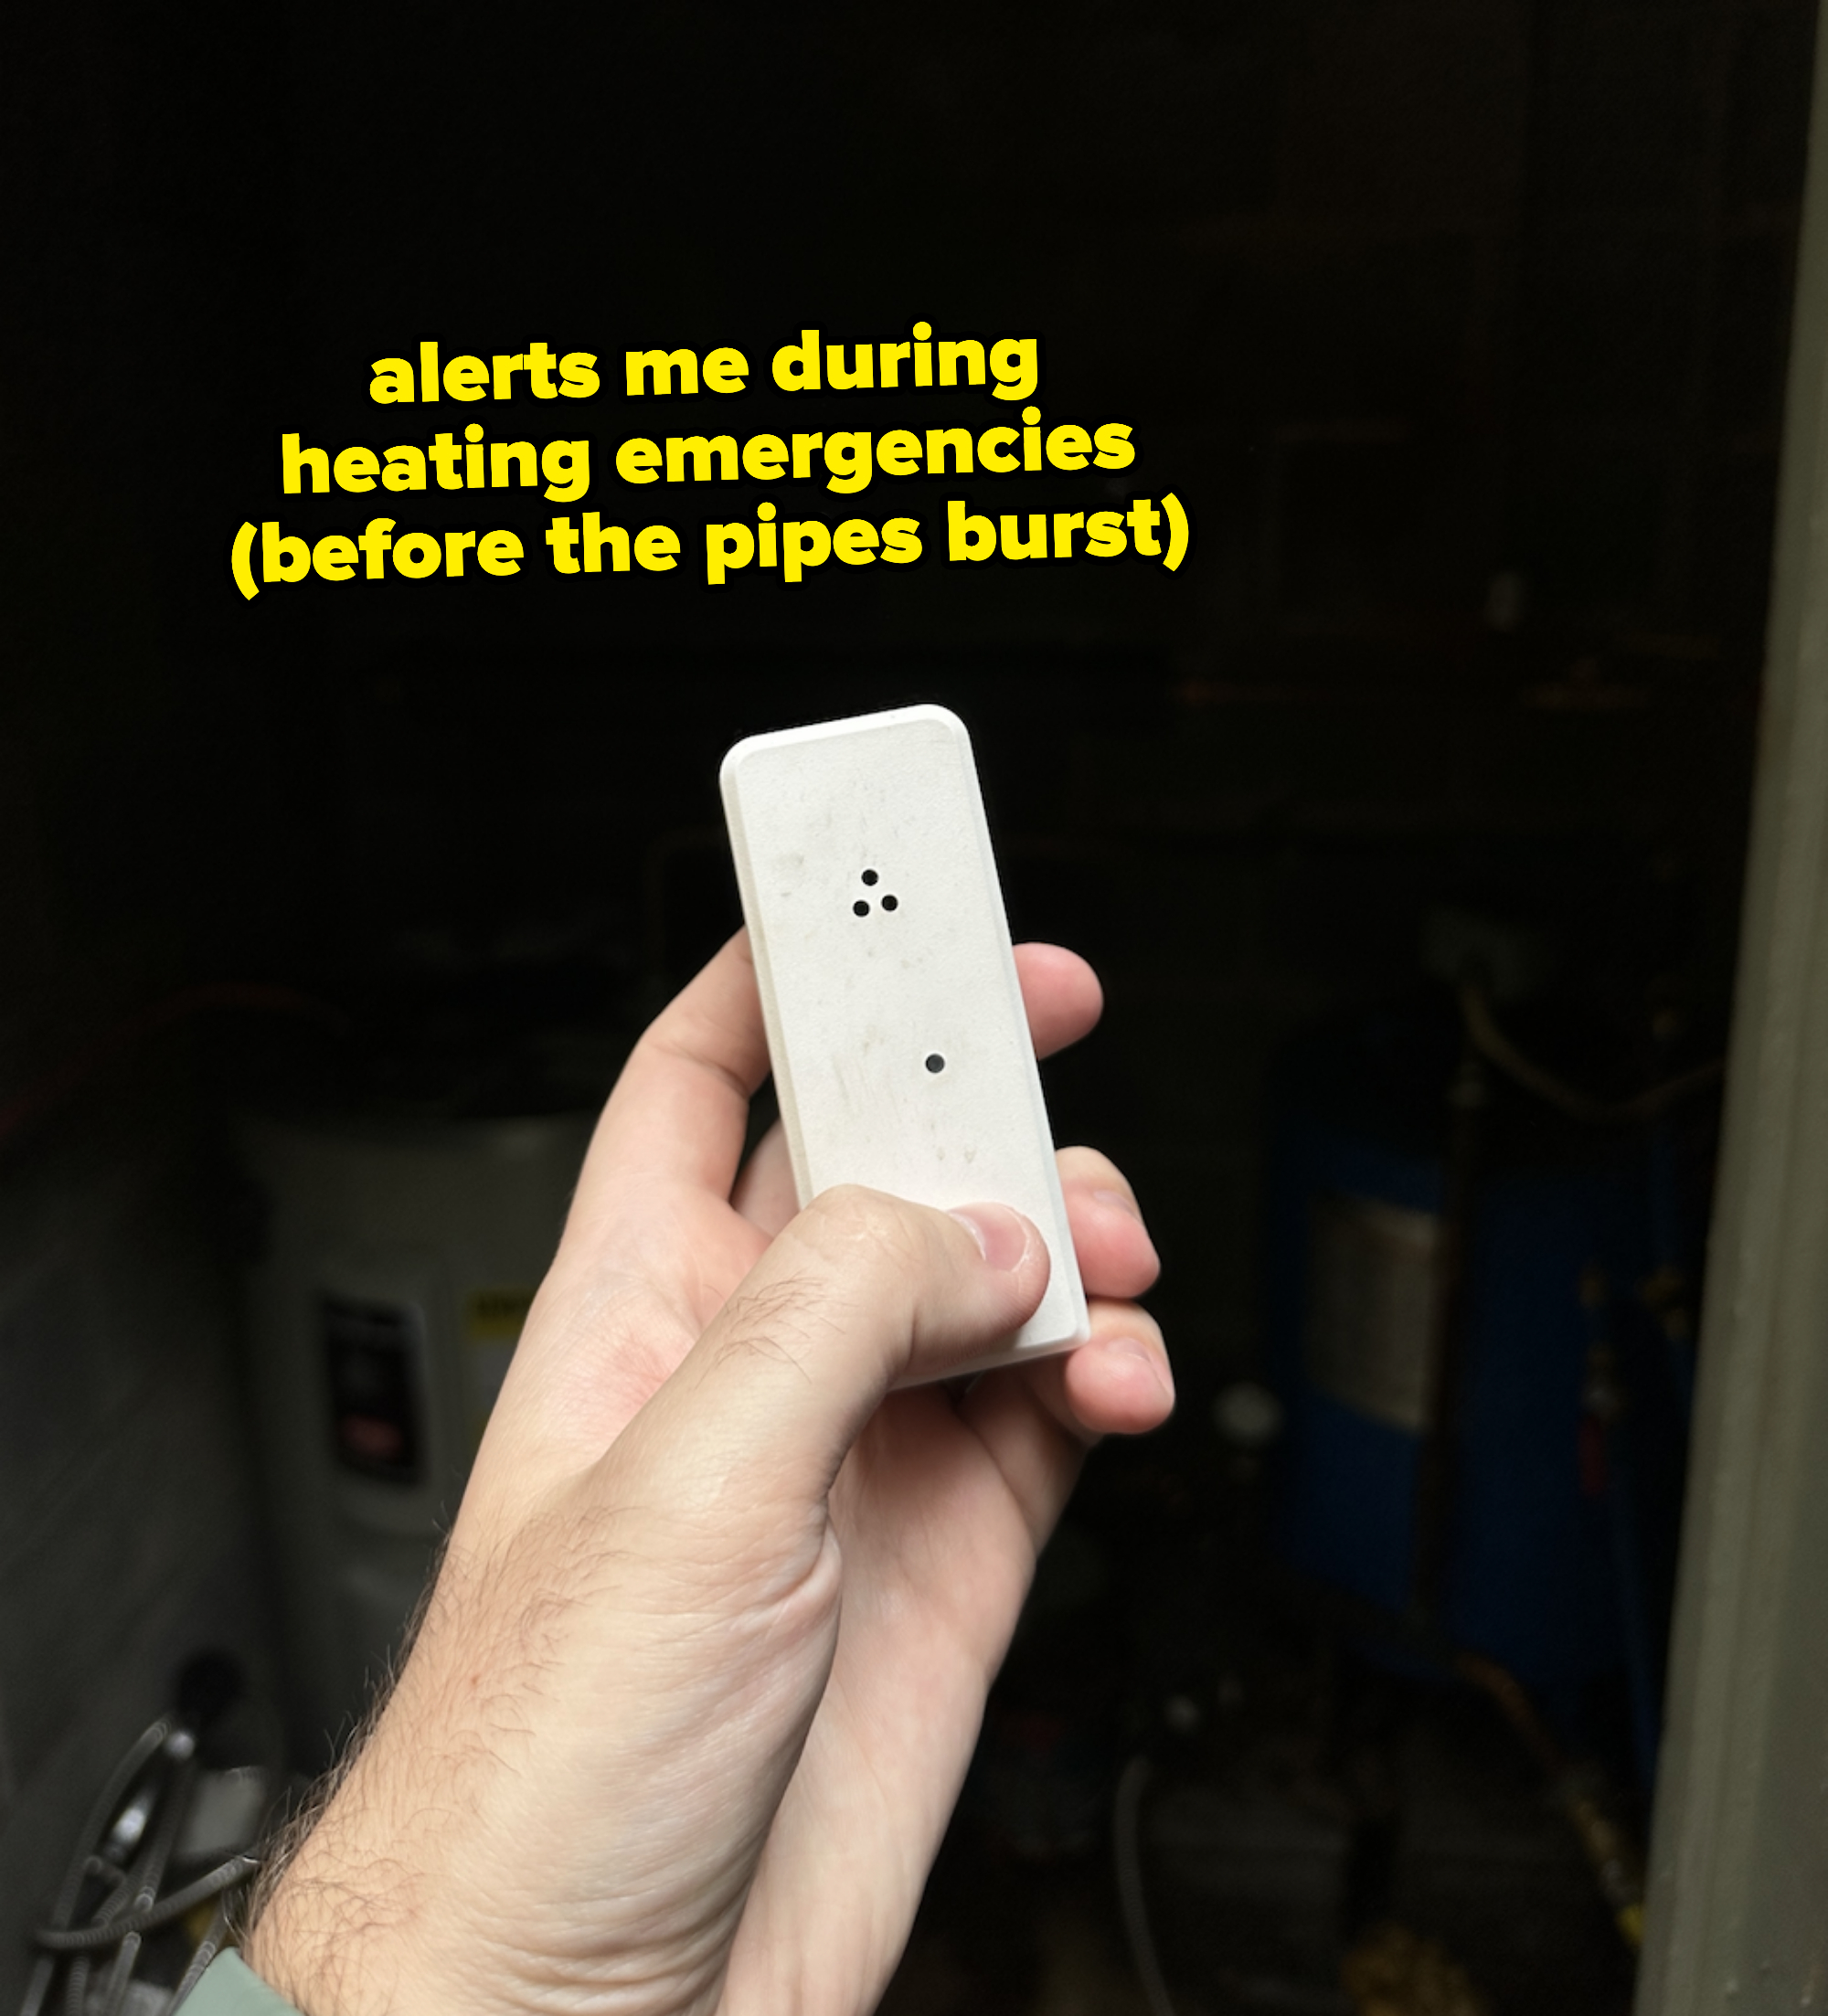 small white device that alerts the author before pipes burst